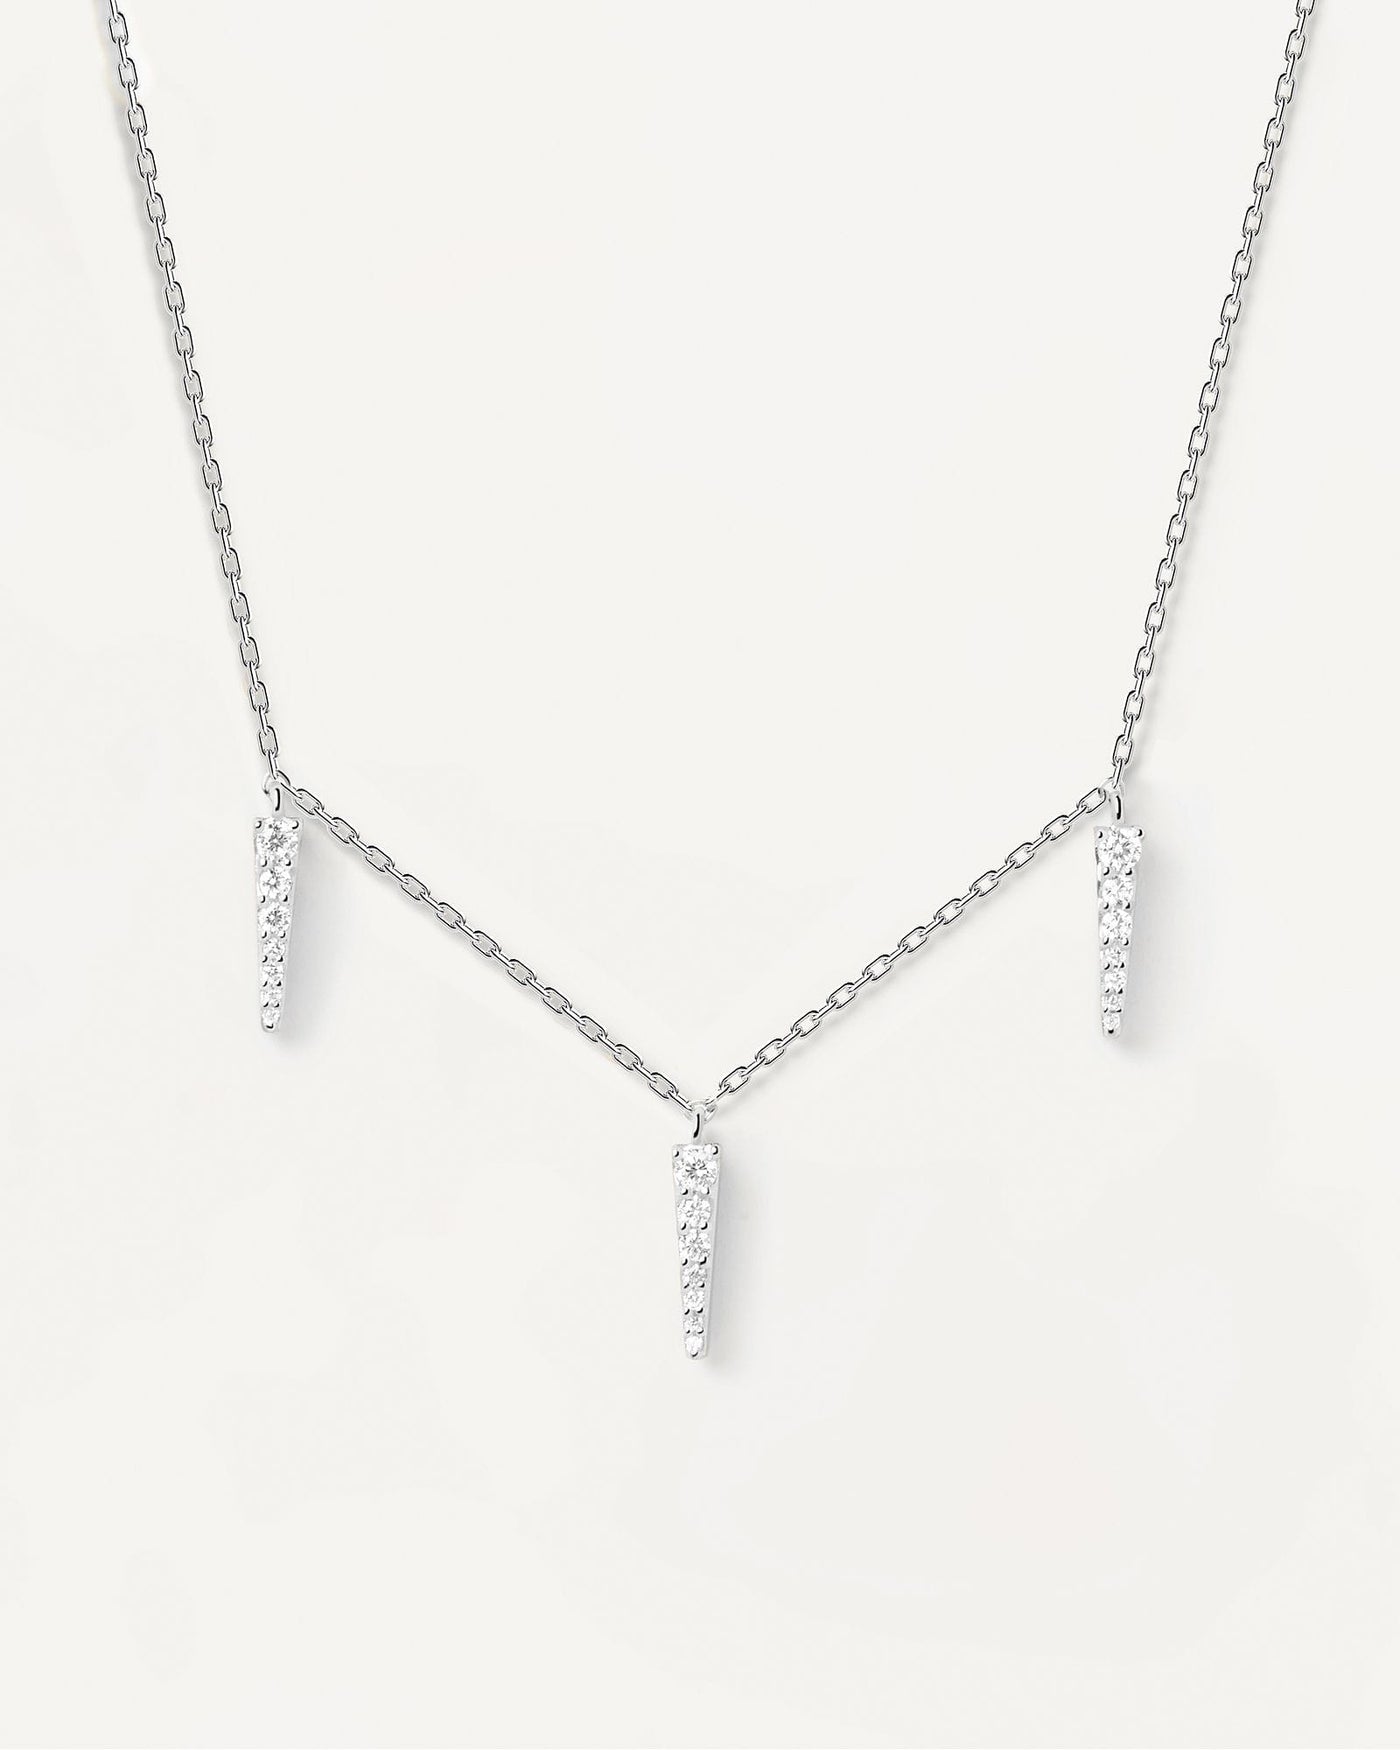 2024 Selection | Peak Supreme Silver Necklace. 925 silver necklace with three pointy pendants of white zirconia. Get the latest arrival from PDPAOLA. Place your order safely and get this Best Seller. Free Shipping.